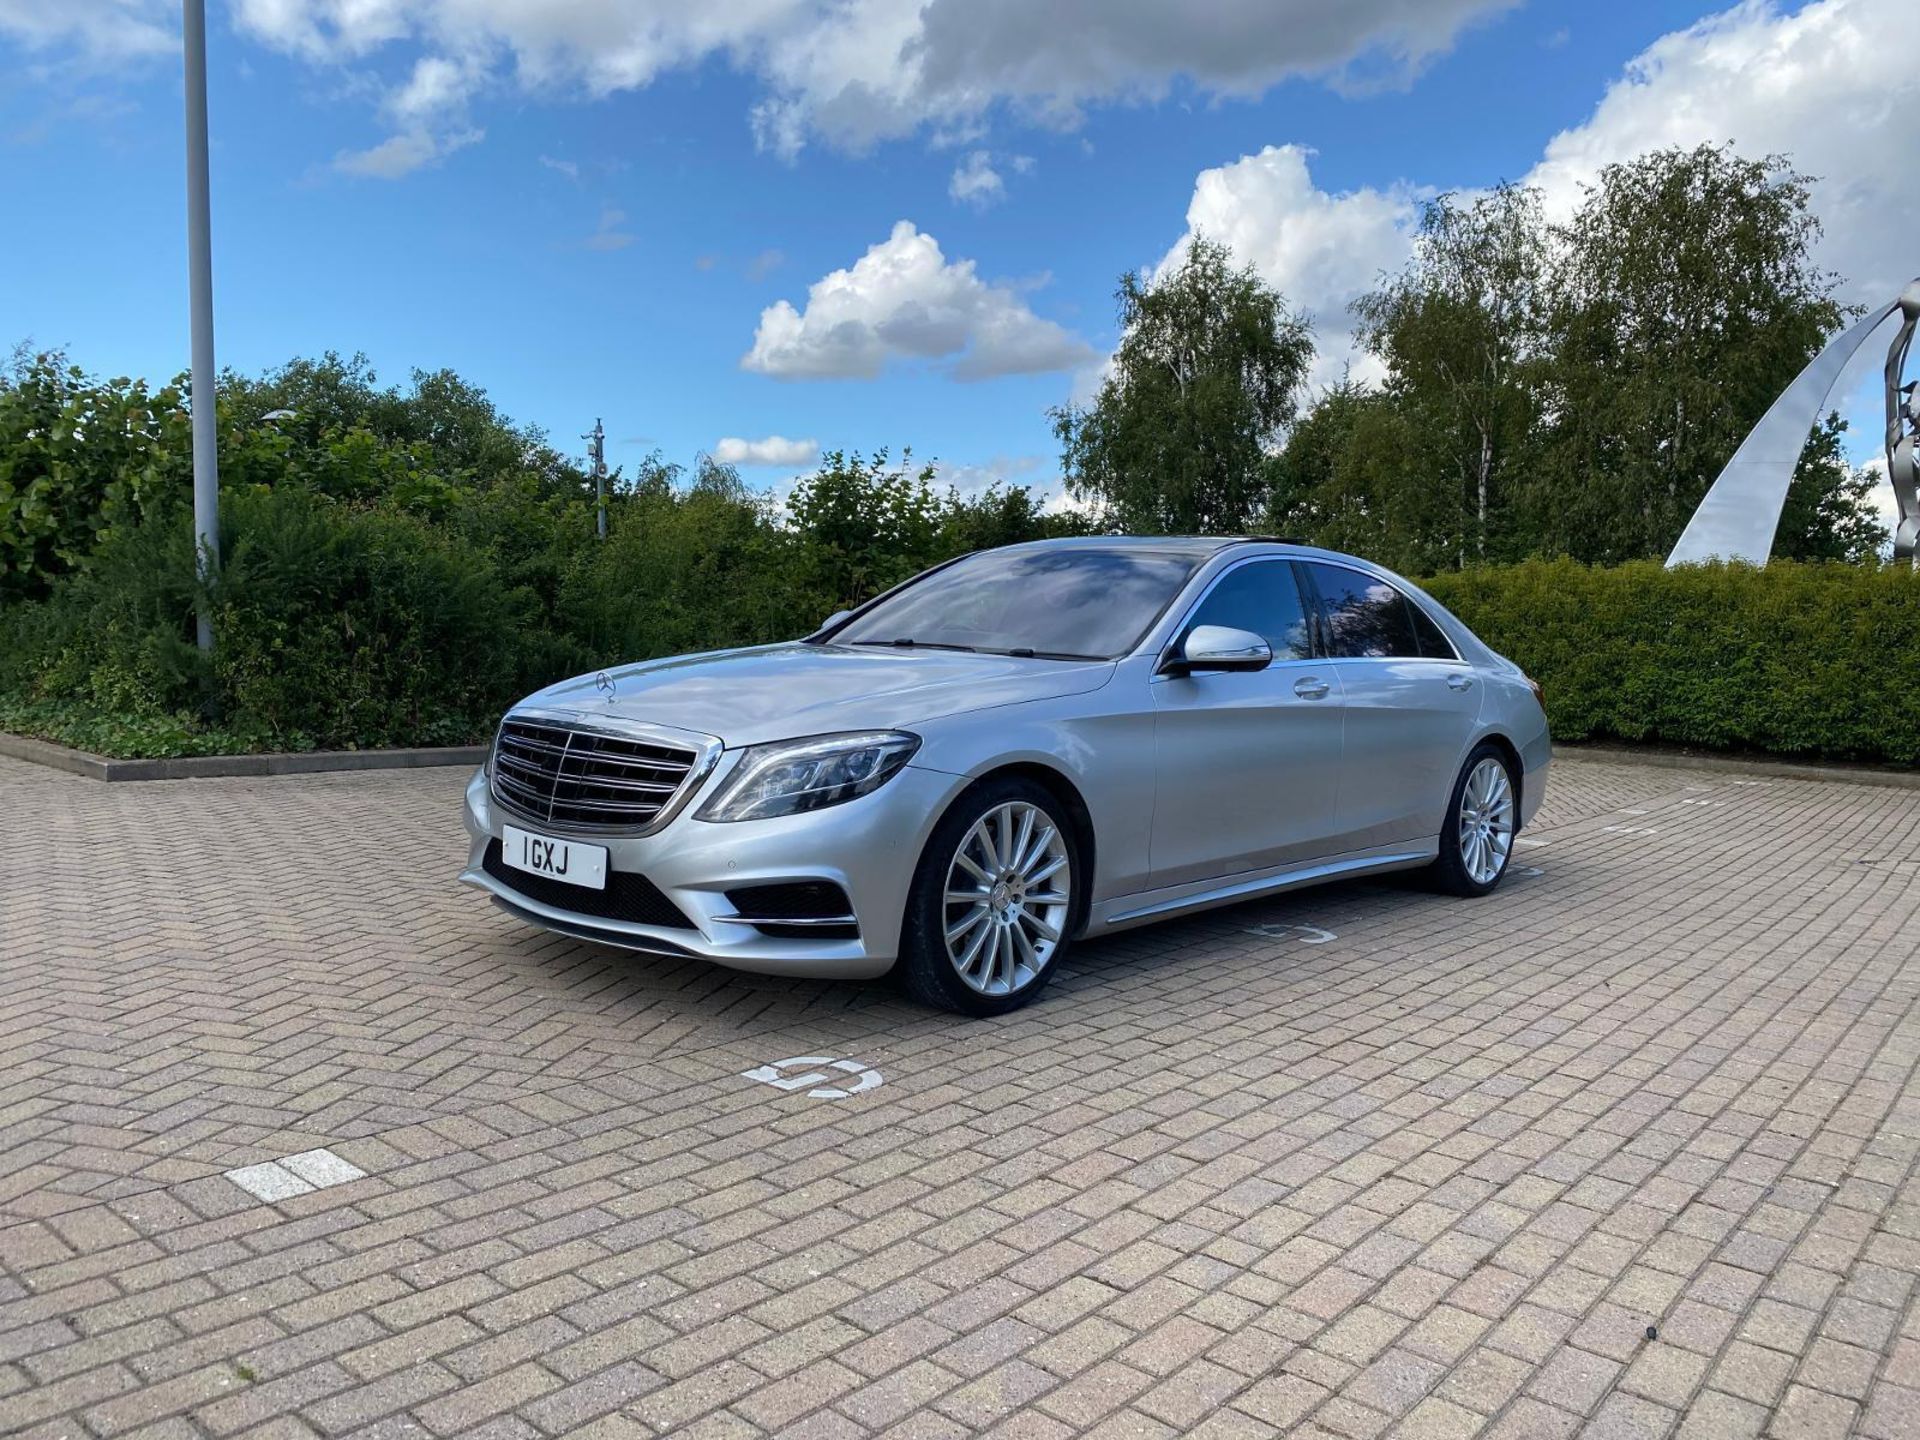 2015 MERCEDES S-CLASS: LUXURY AND PERFORMANCE WITH 94K MILES >>--NO VAT ON HAMMER--<<